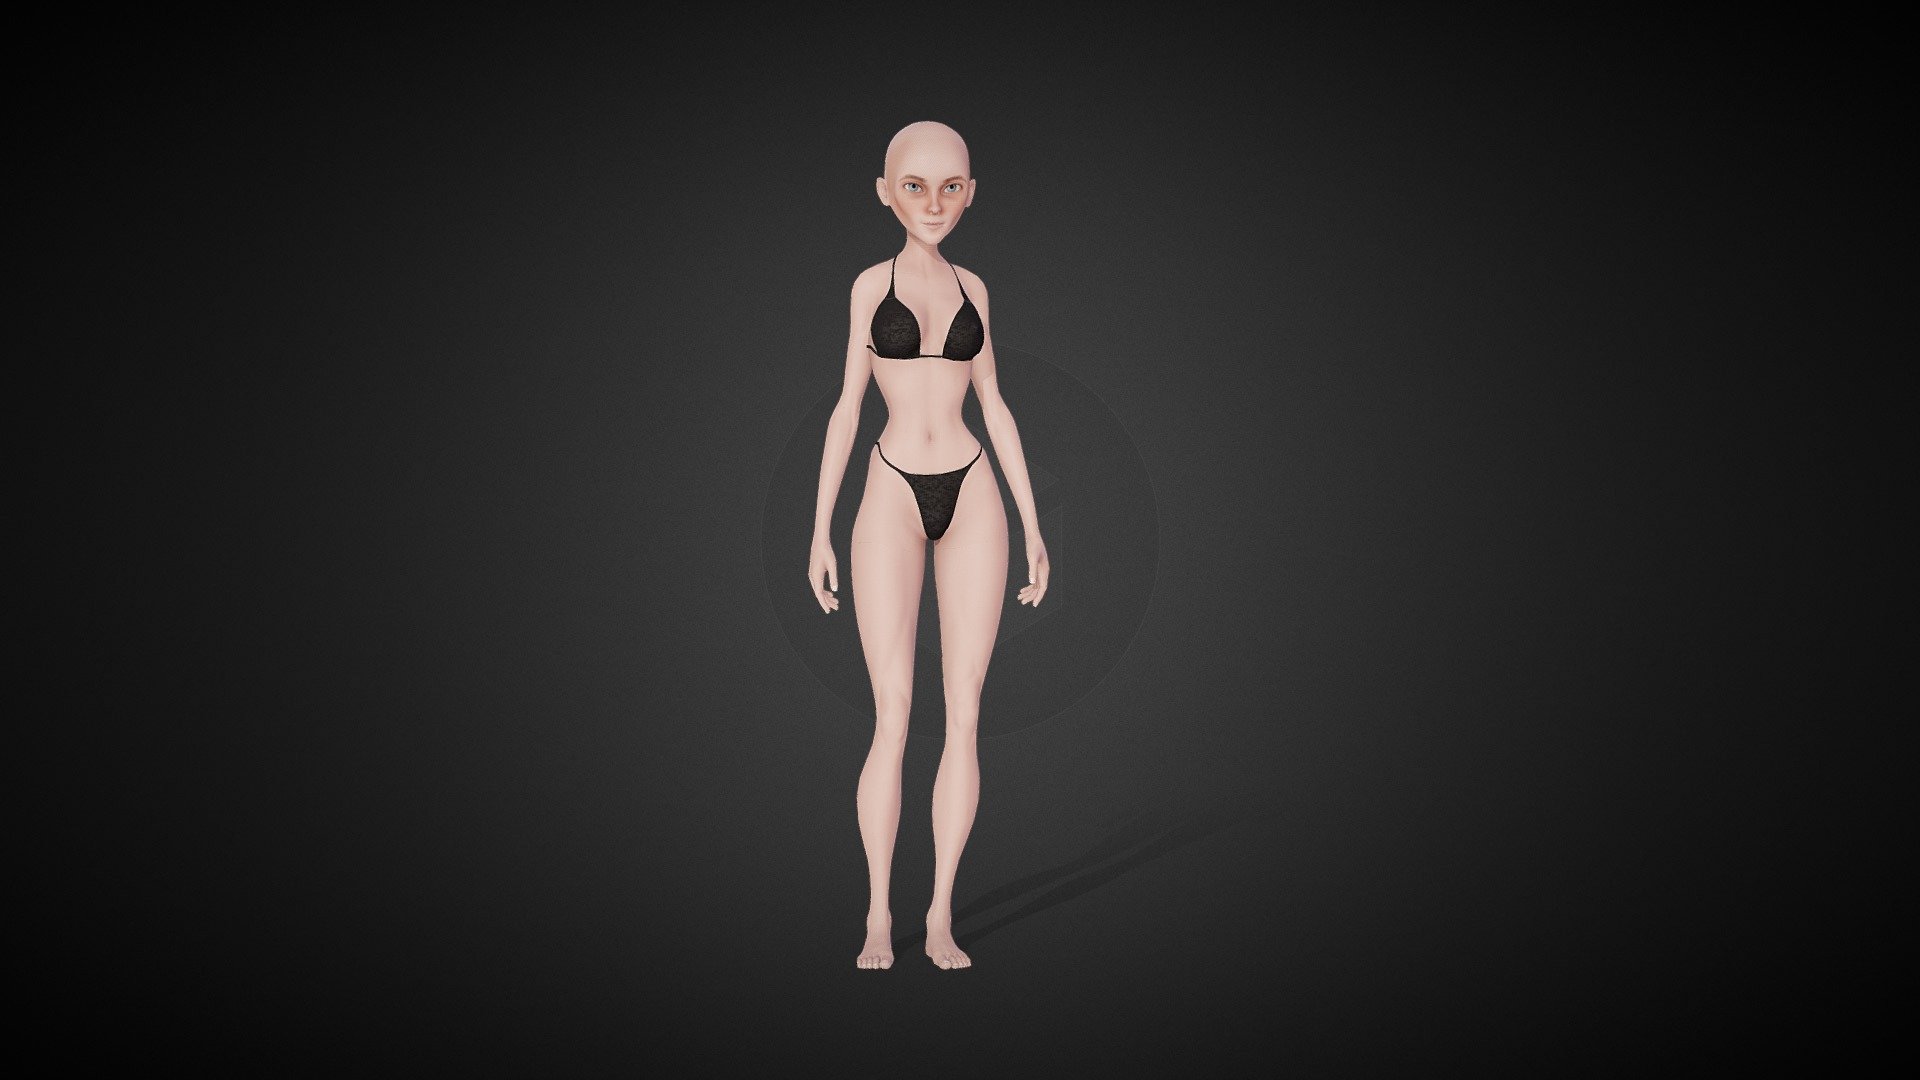 CC4 Bunny (CC1 character now remastered for Character Creator 4)

Find out more here:
https://marketplace.reallusion.com/cc4-stylized-base-combo-remastered

You are looking for characters for your project? Check out all my Character Creator assets here:
https://www.reallusion.com/contentstore/featureddeveloper/profile/#!/ToKoMotion/Character%20Creator - CC4 Bunny (CC1 Remastered) - 3D model by ToKoMotion 3d model